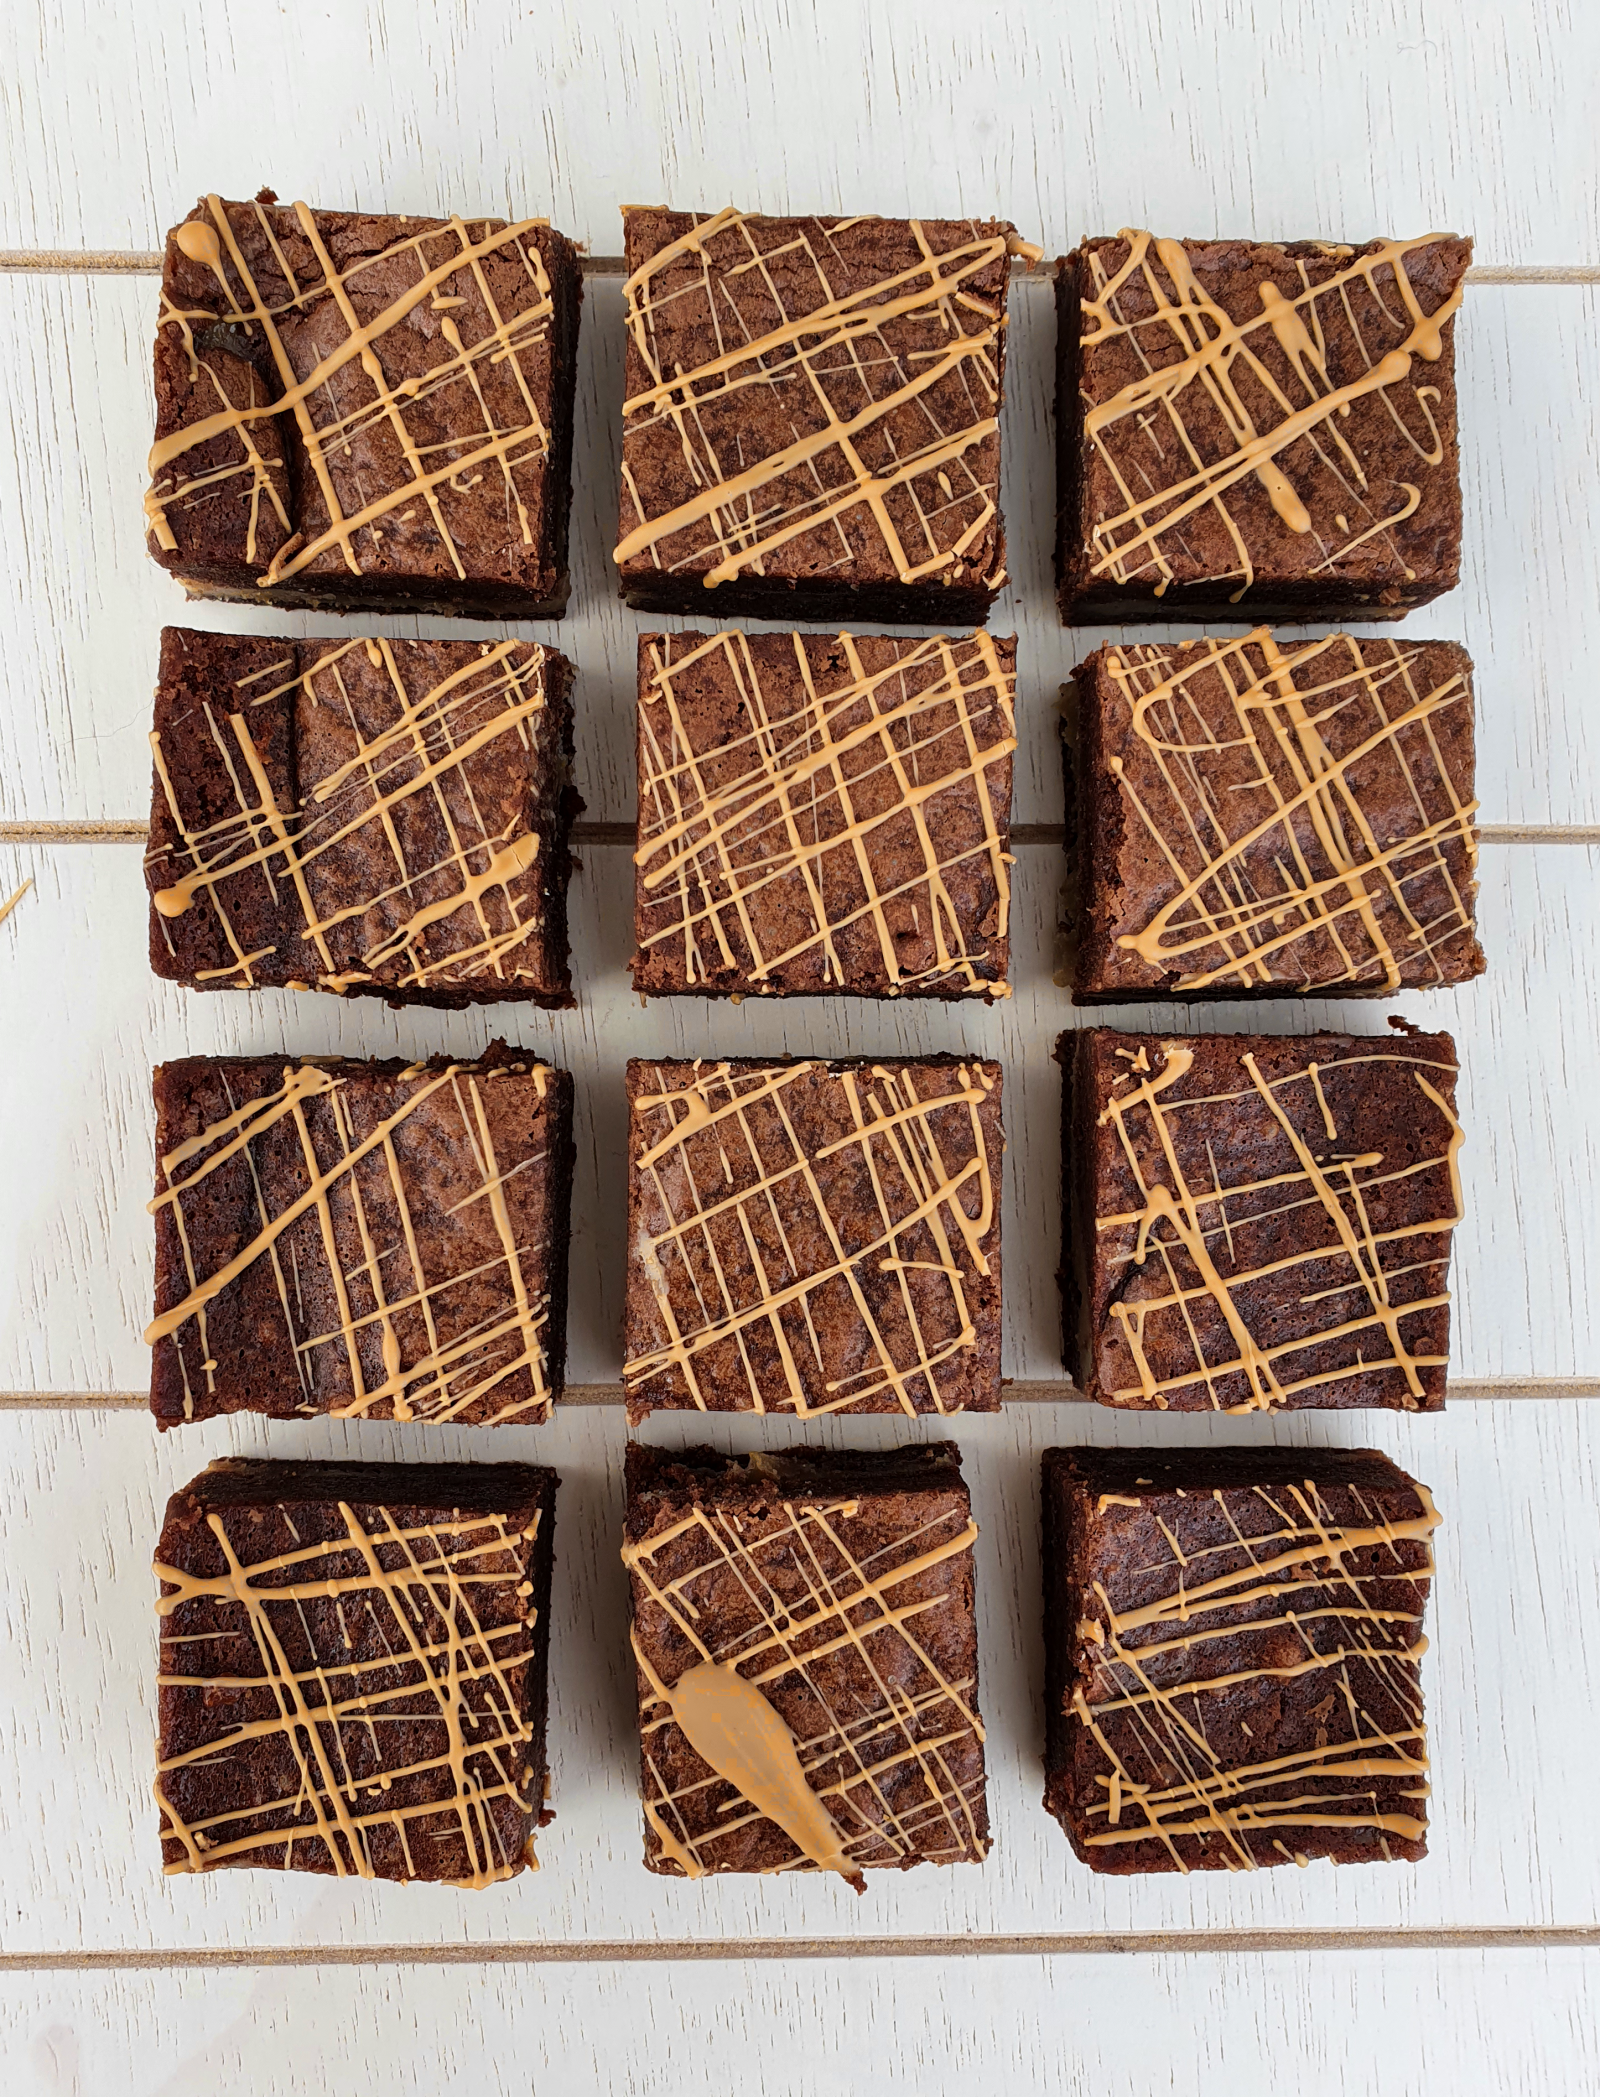 The Salted Caramel Brownie